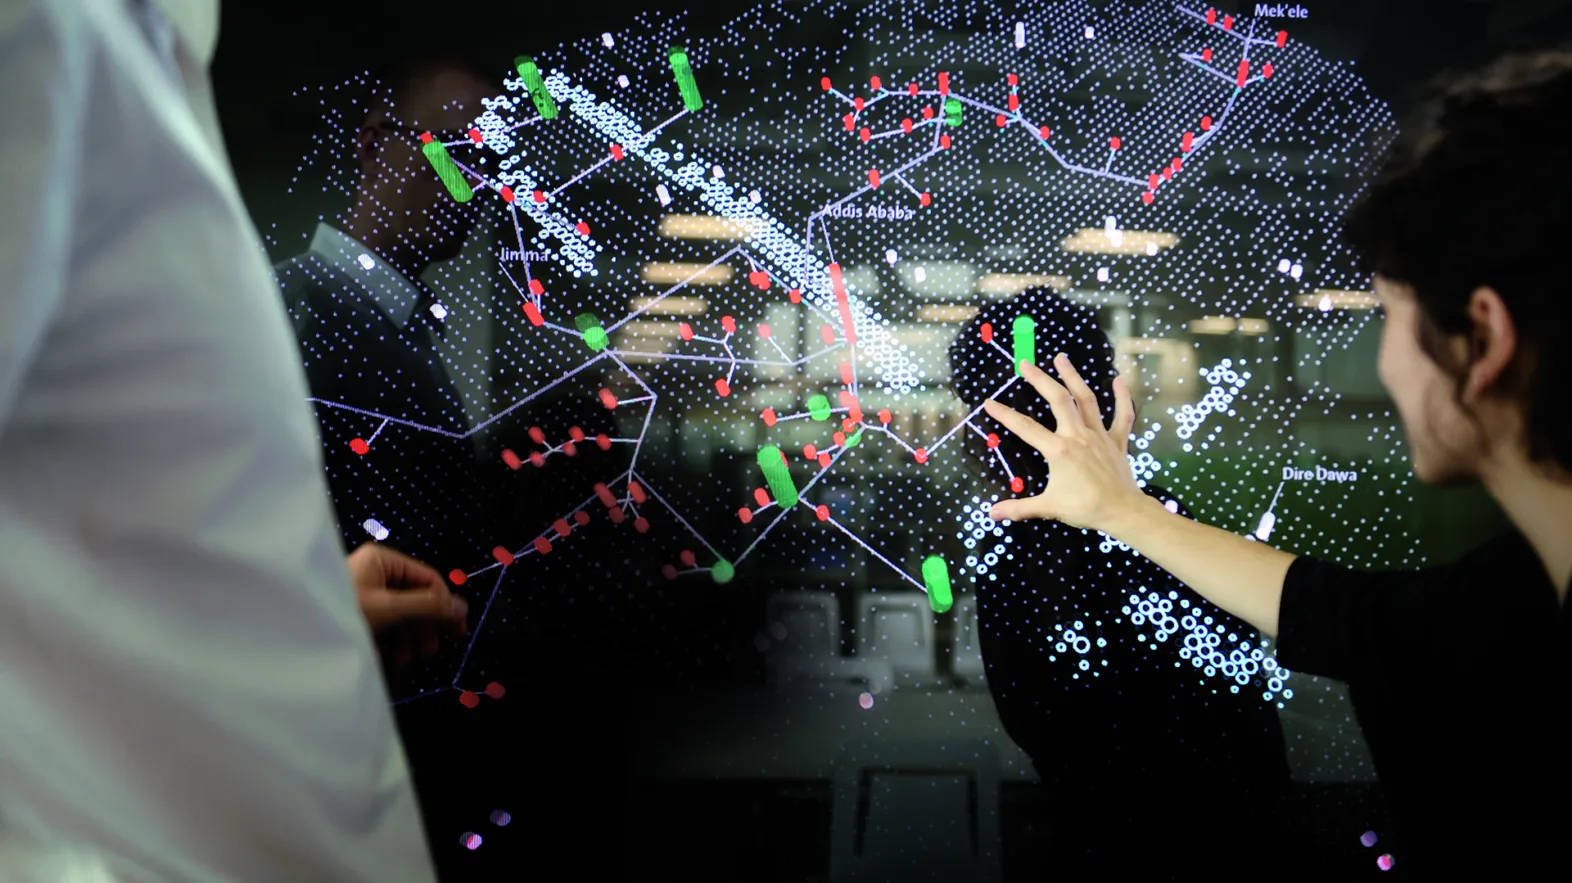 A woman indicates something on a screen with a map of a smart city.